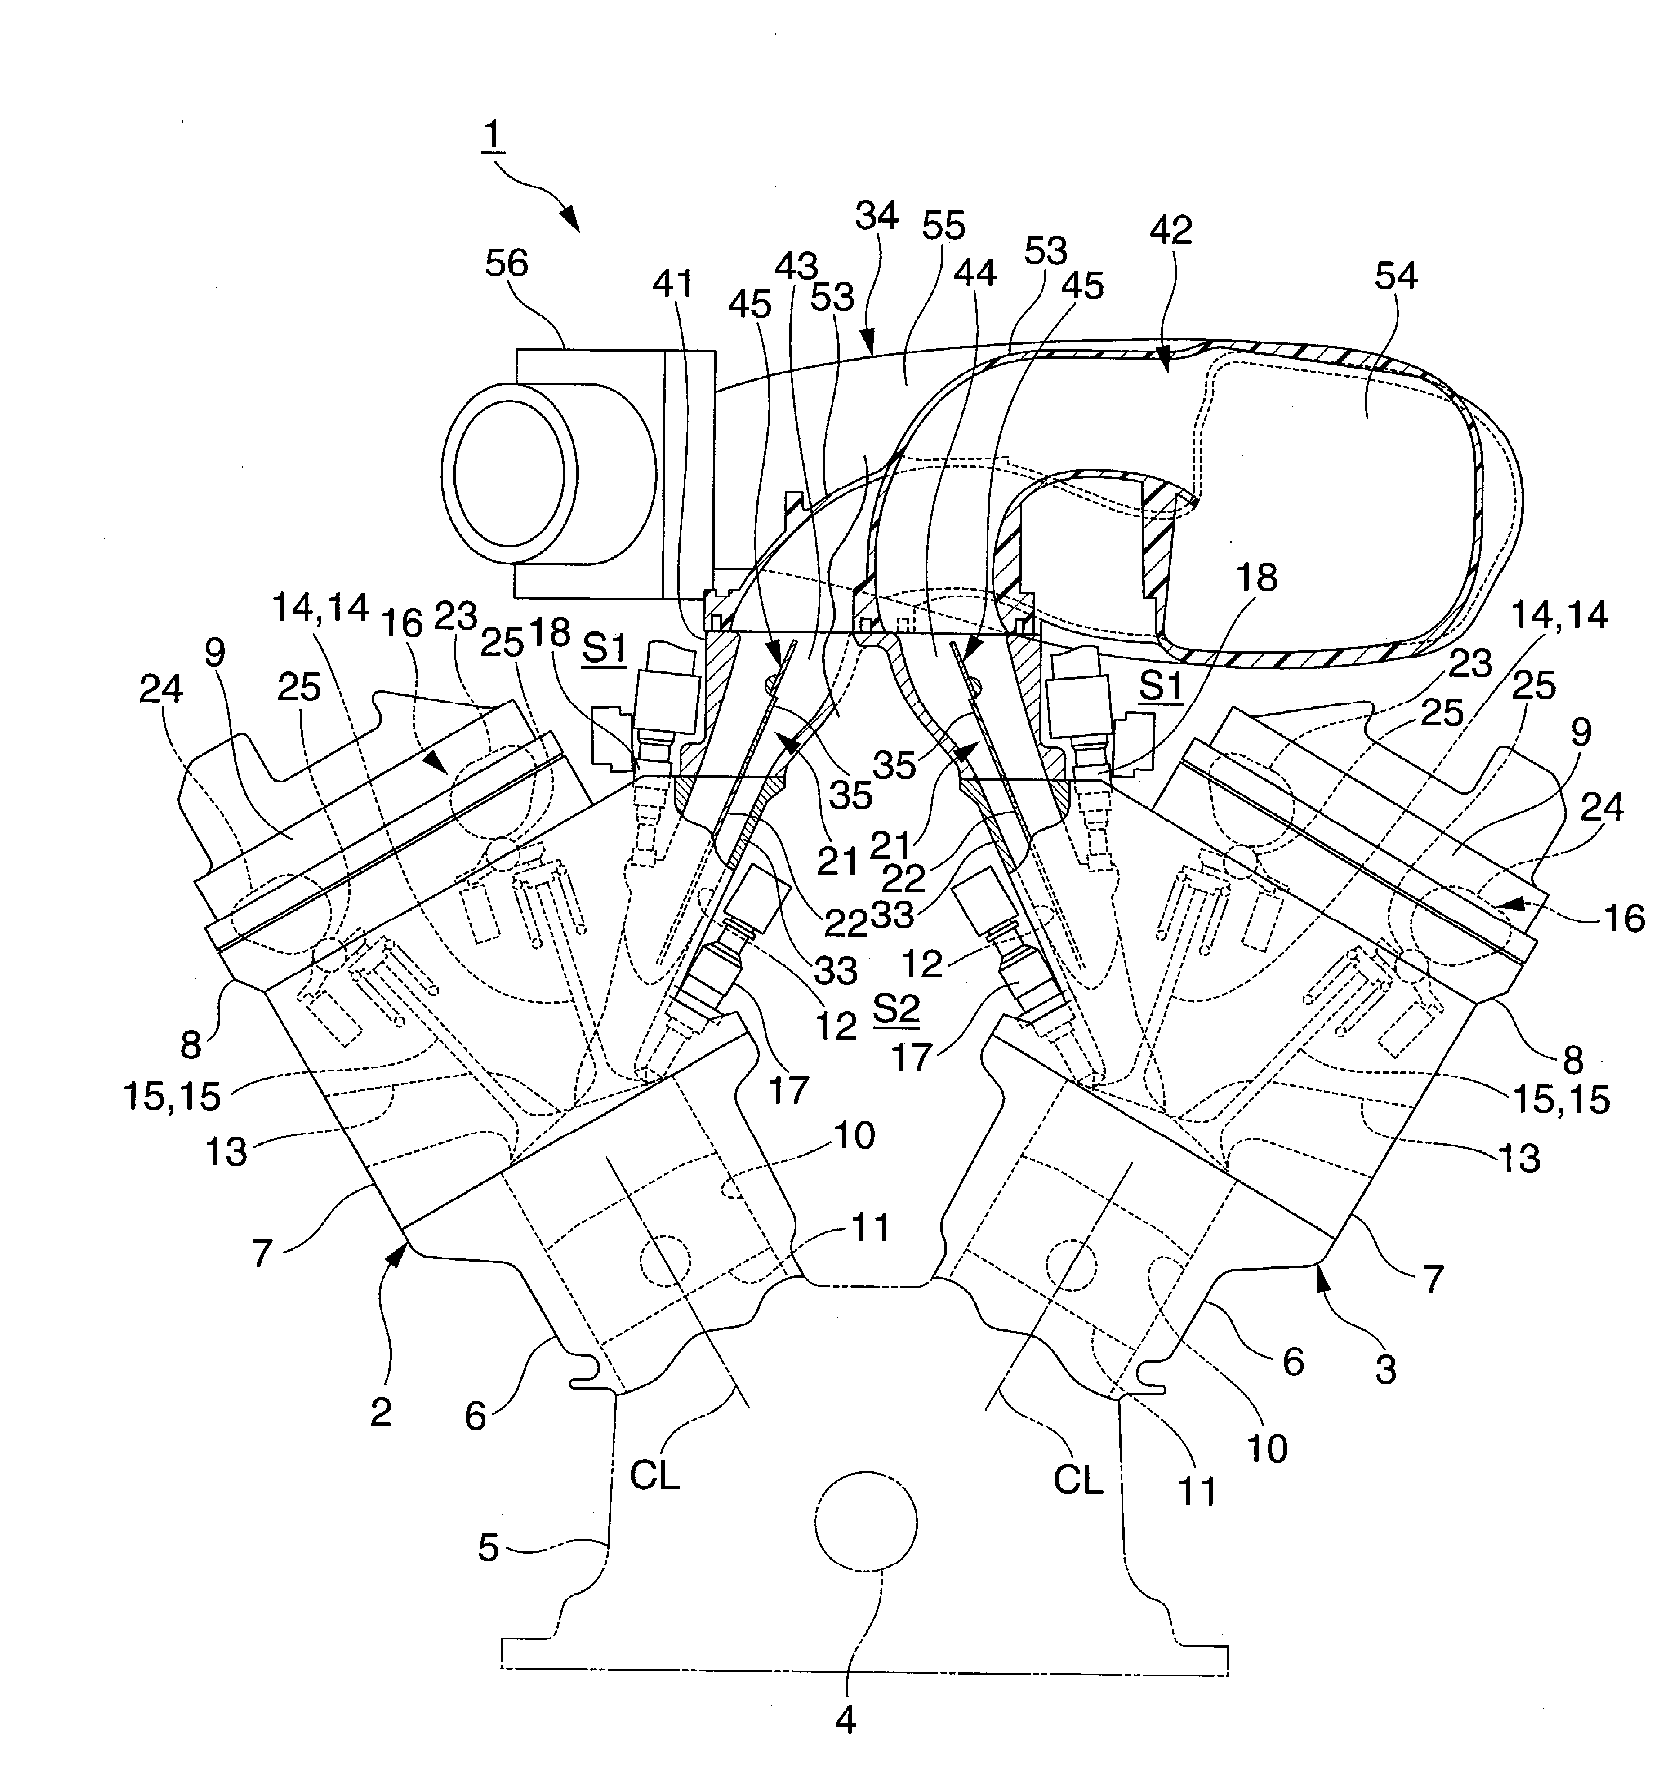 Intake control device for an engine